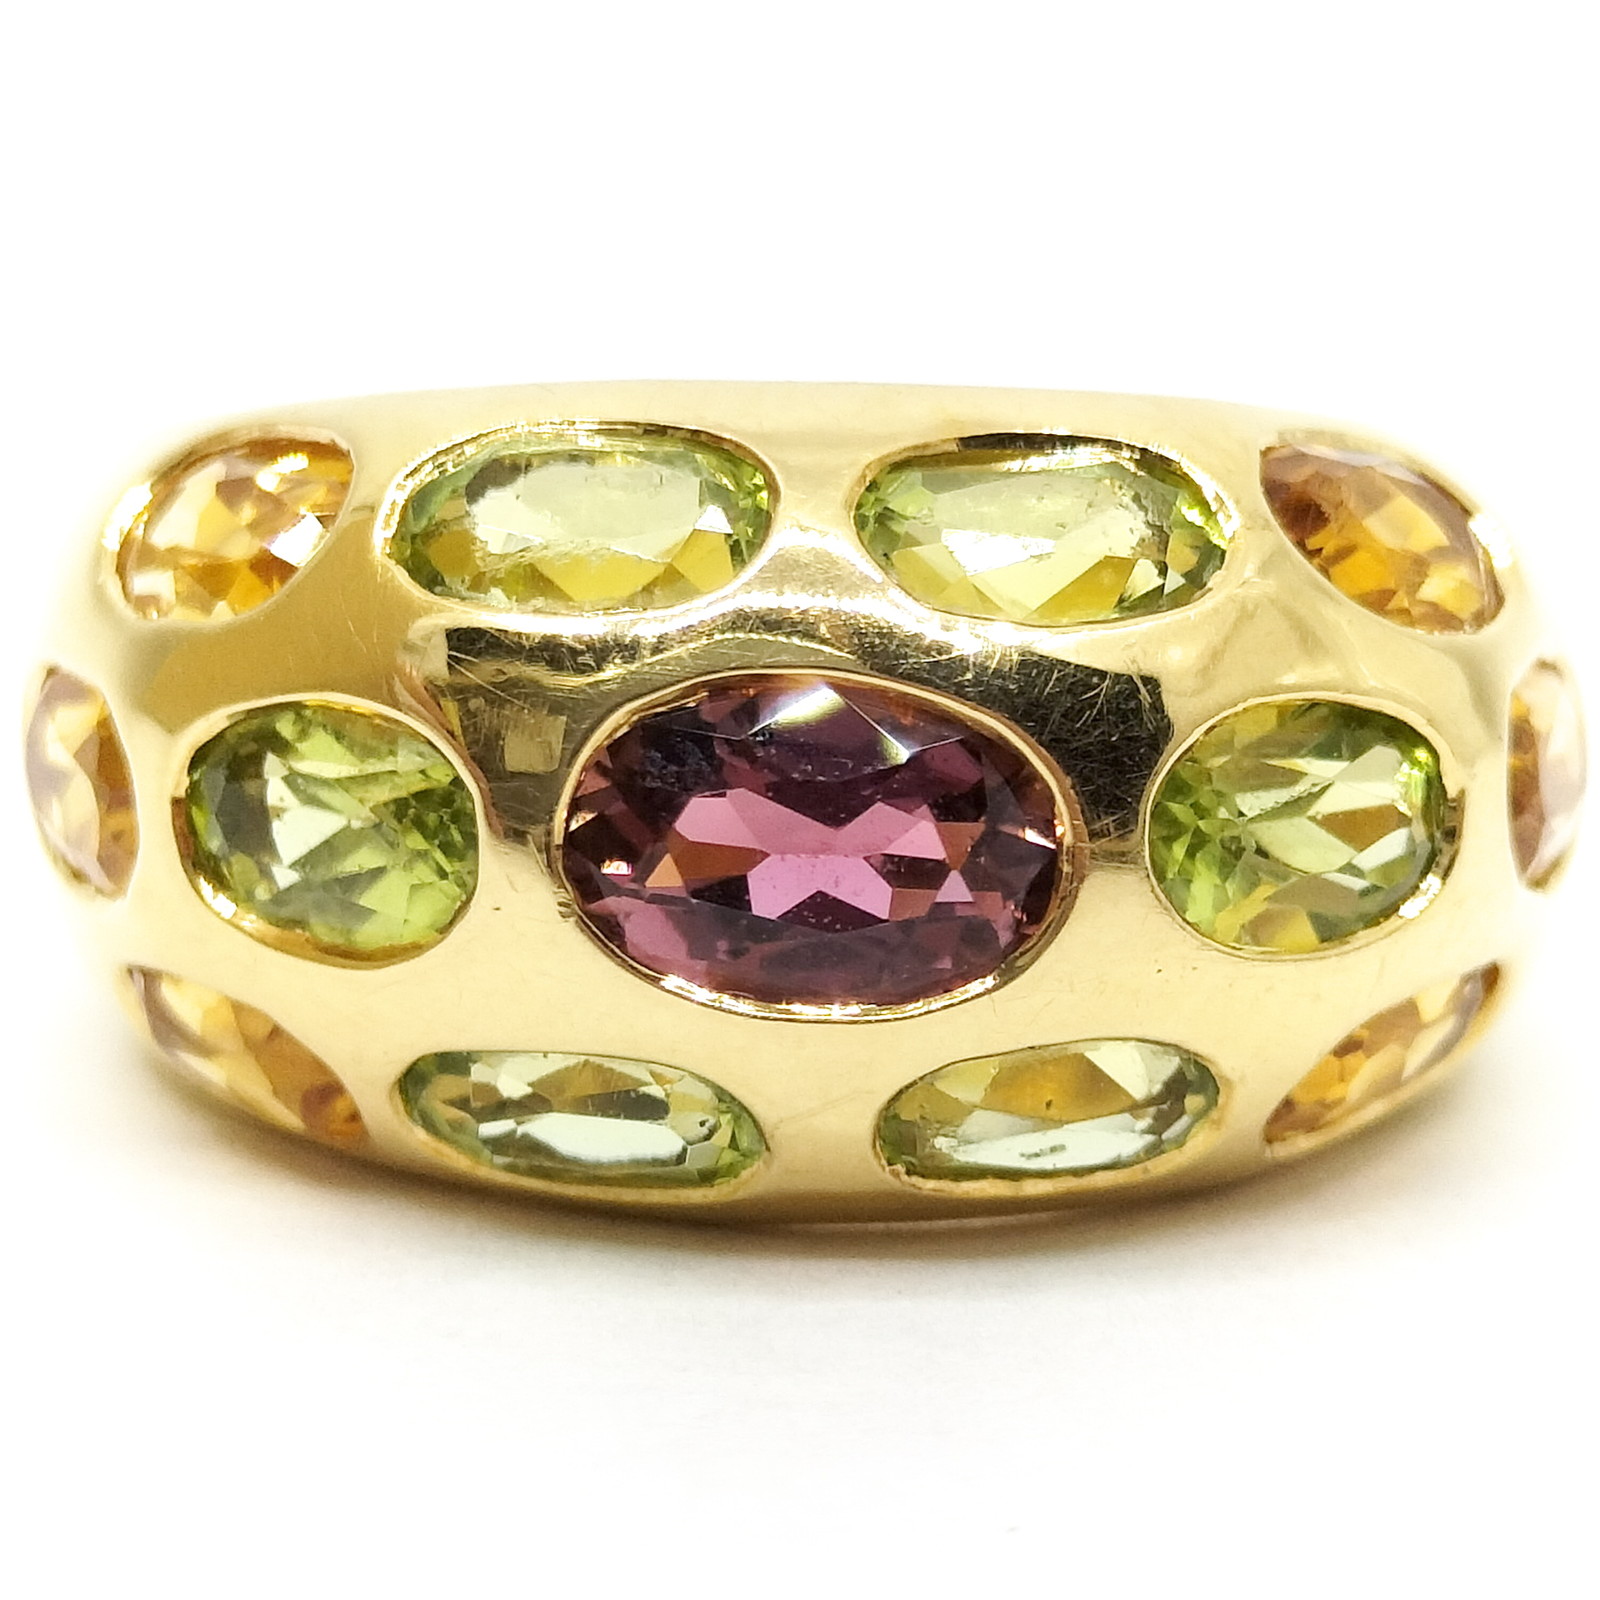 Star Jewelry Ring Other Yellow Gold 3704363 | eBay